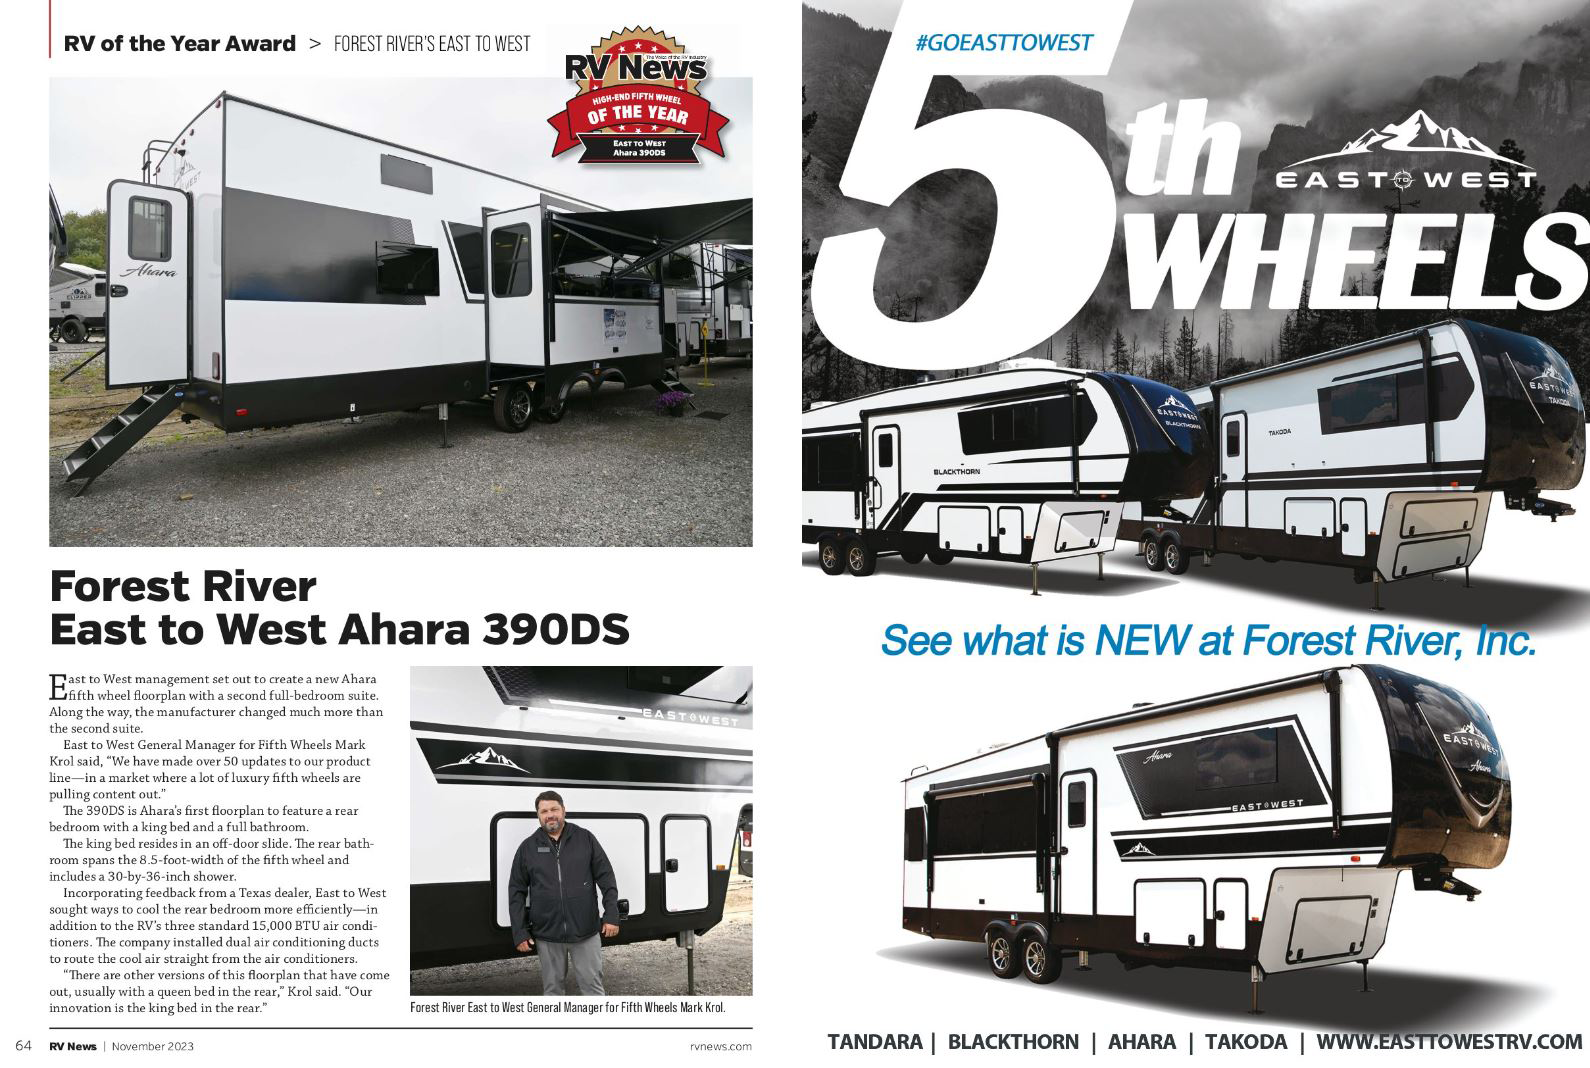 RV News: RV Of The Year, AHARA 390DS